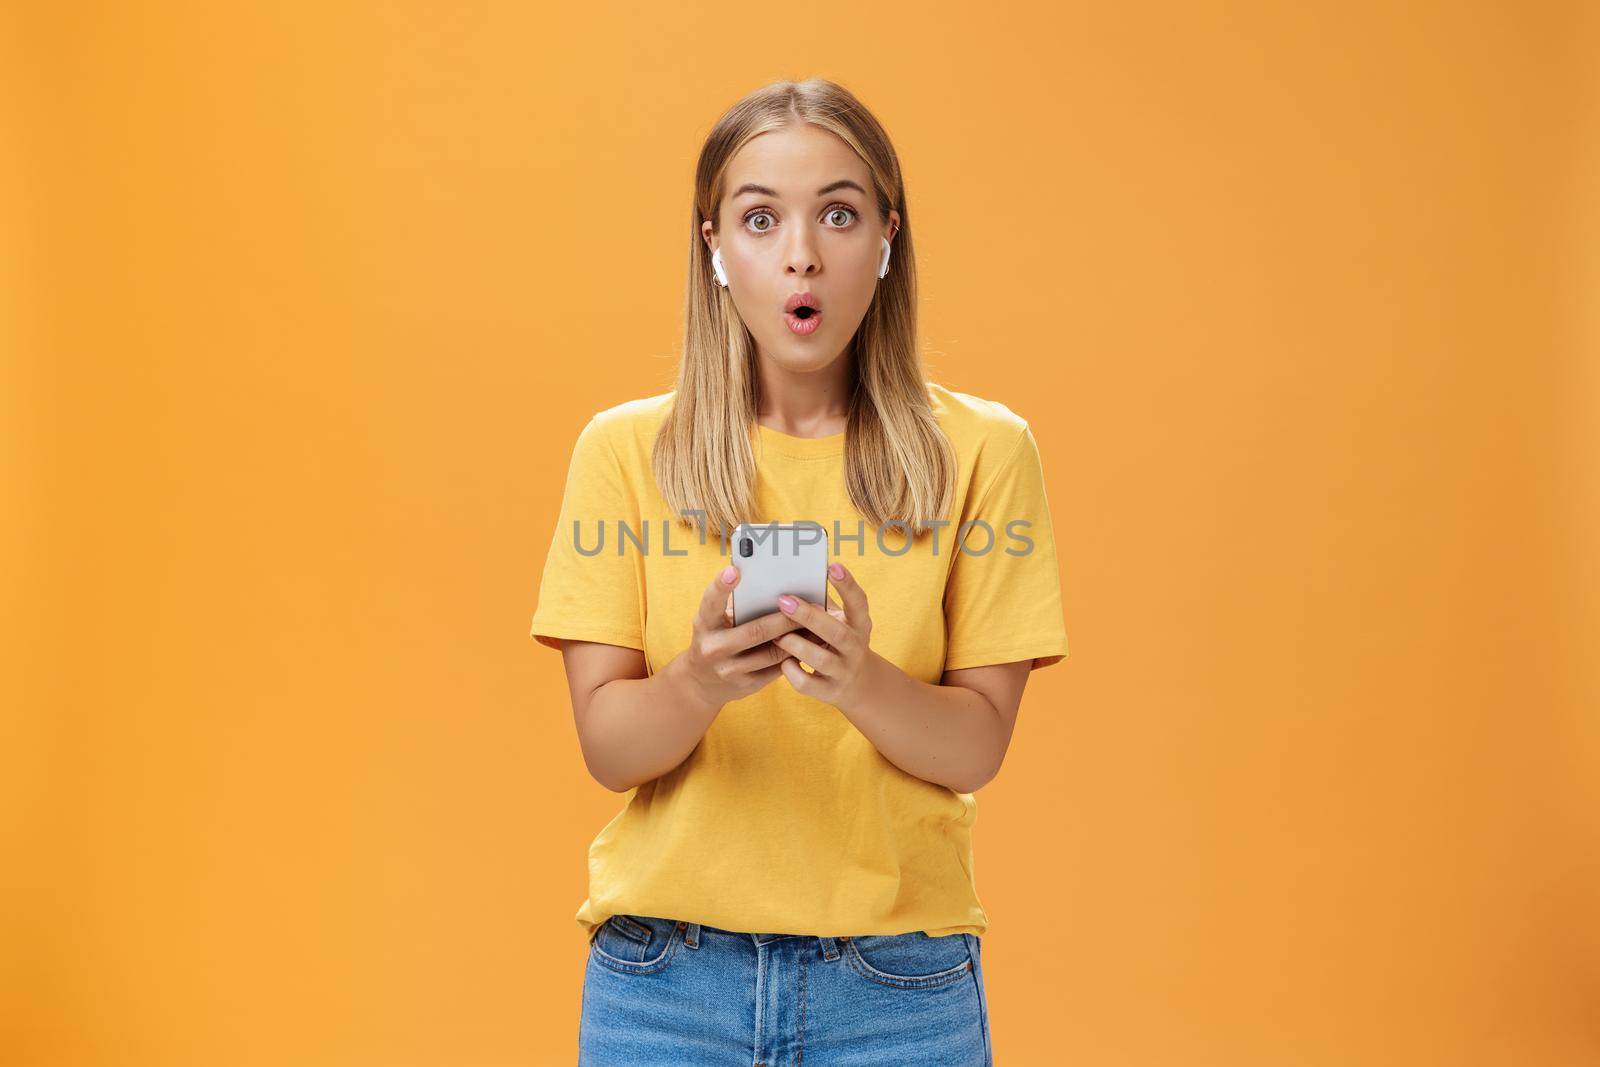 Woman surprised how awesome sounds new wireless earbuds holding smartphone wearing earphones folding lips in wow and amazement listening music impressed by good product over orange background. Copy space